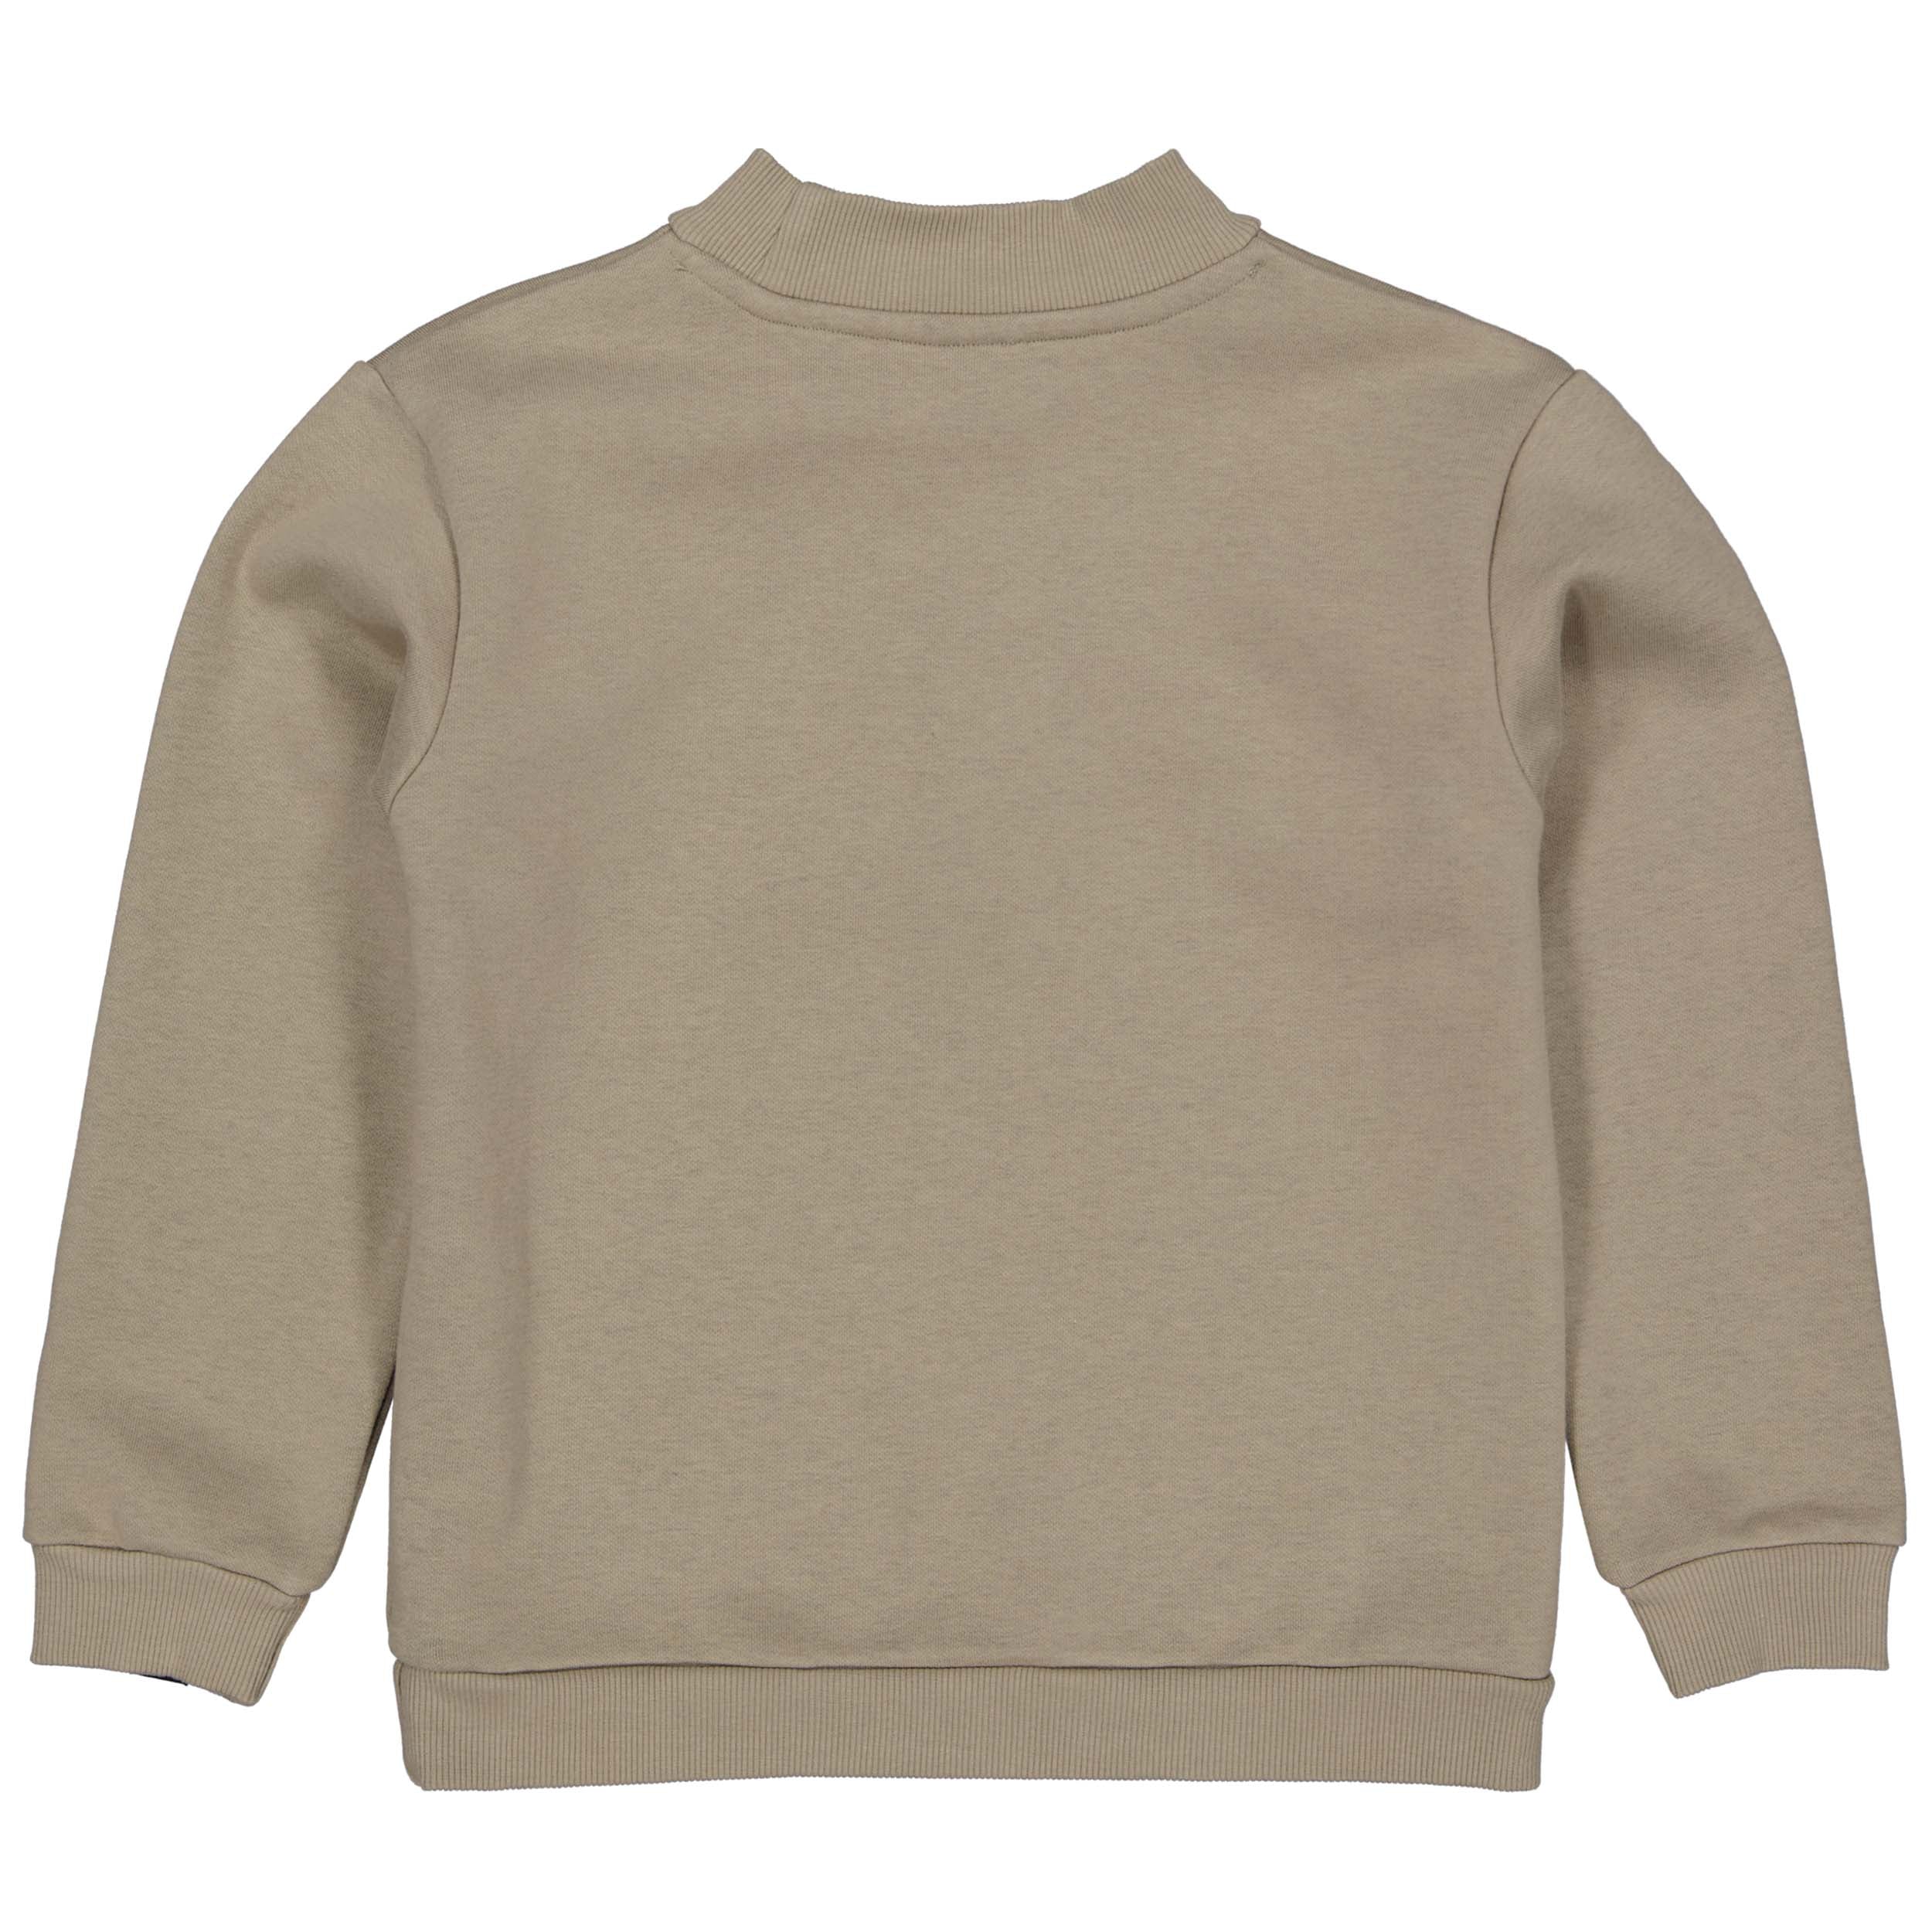 Unisexs Sweater Taupe van House of Artists in de kleur Taupe in maat 170-176.